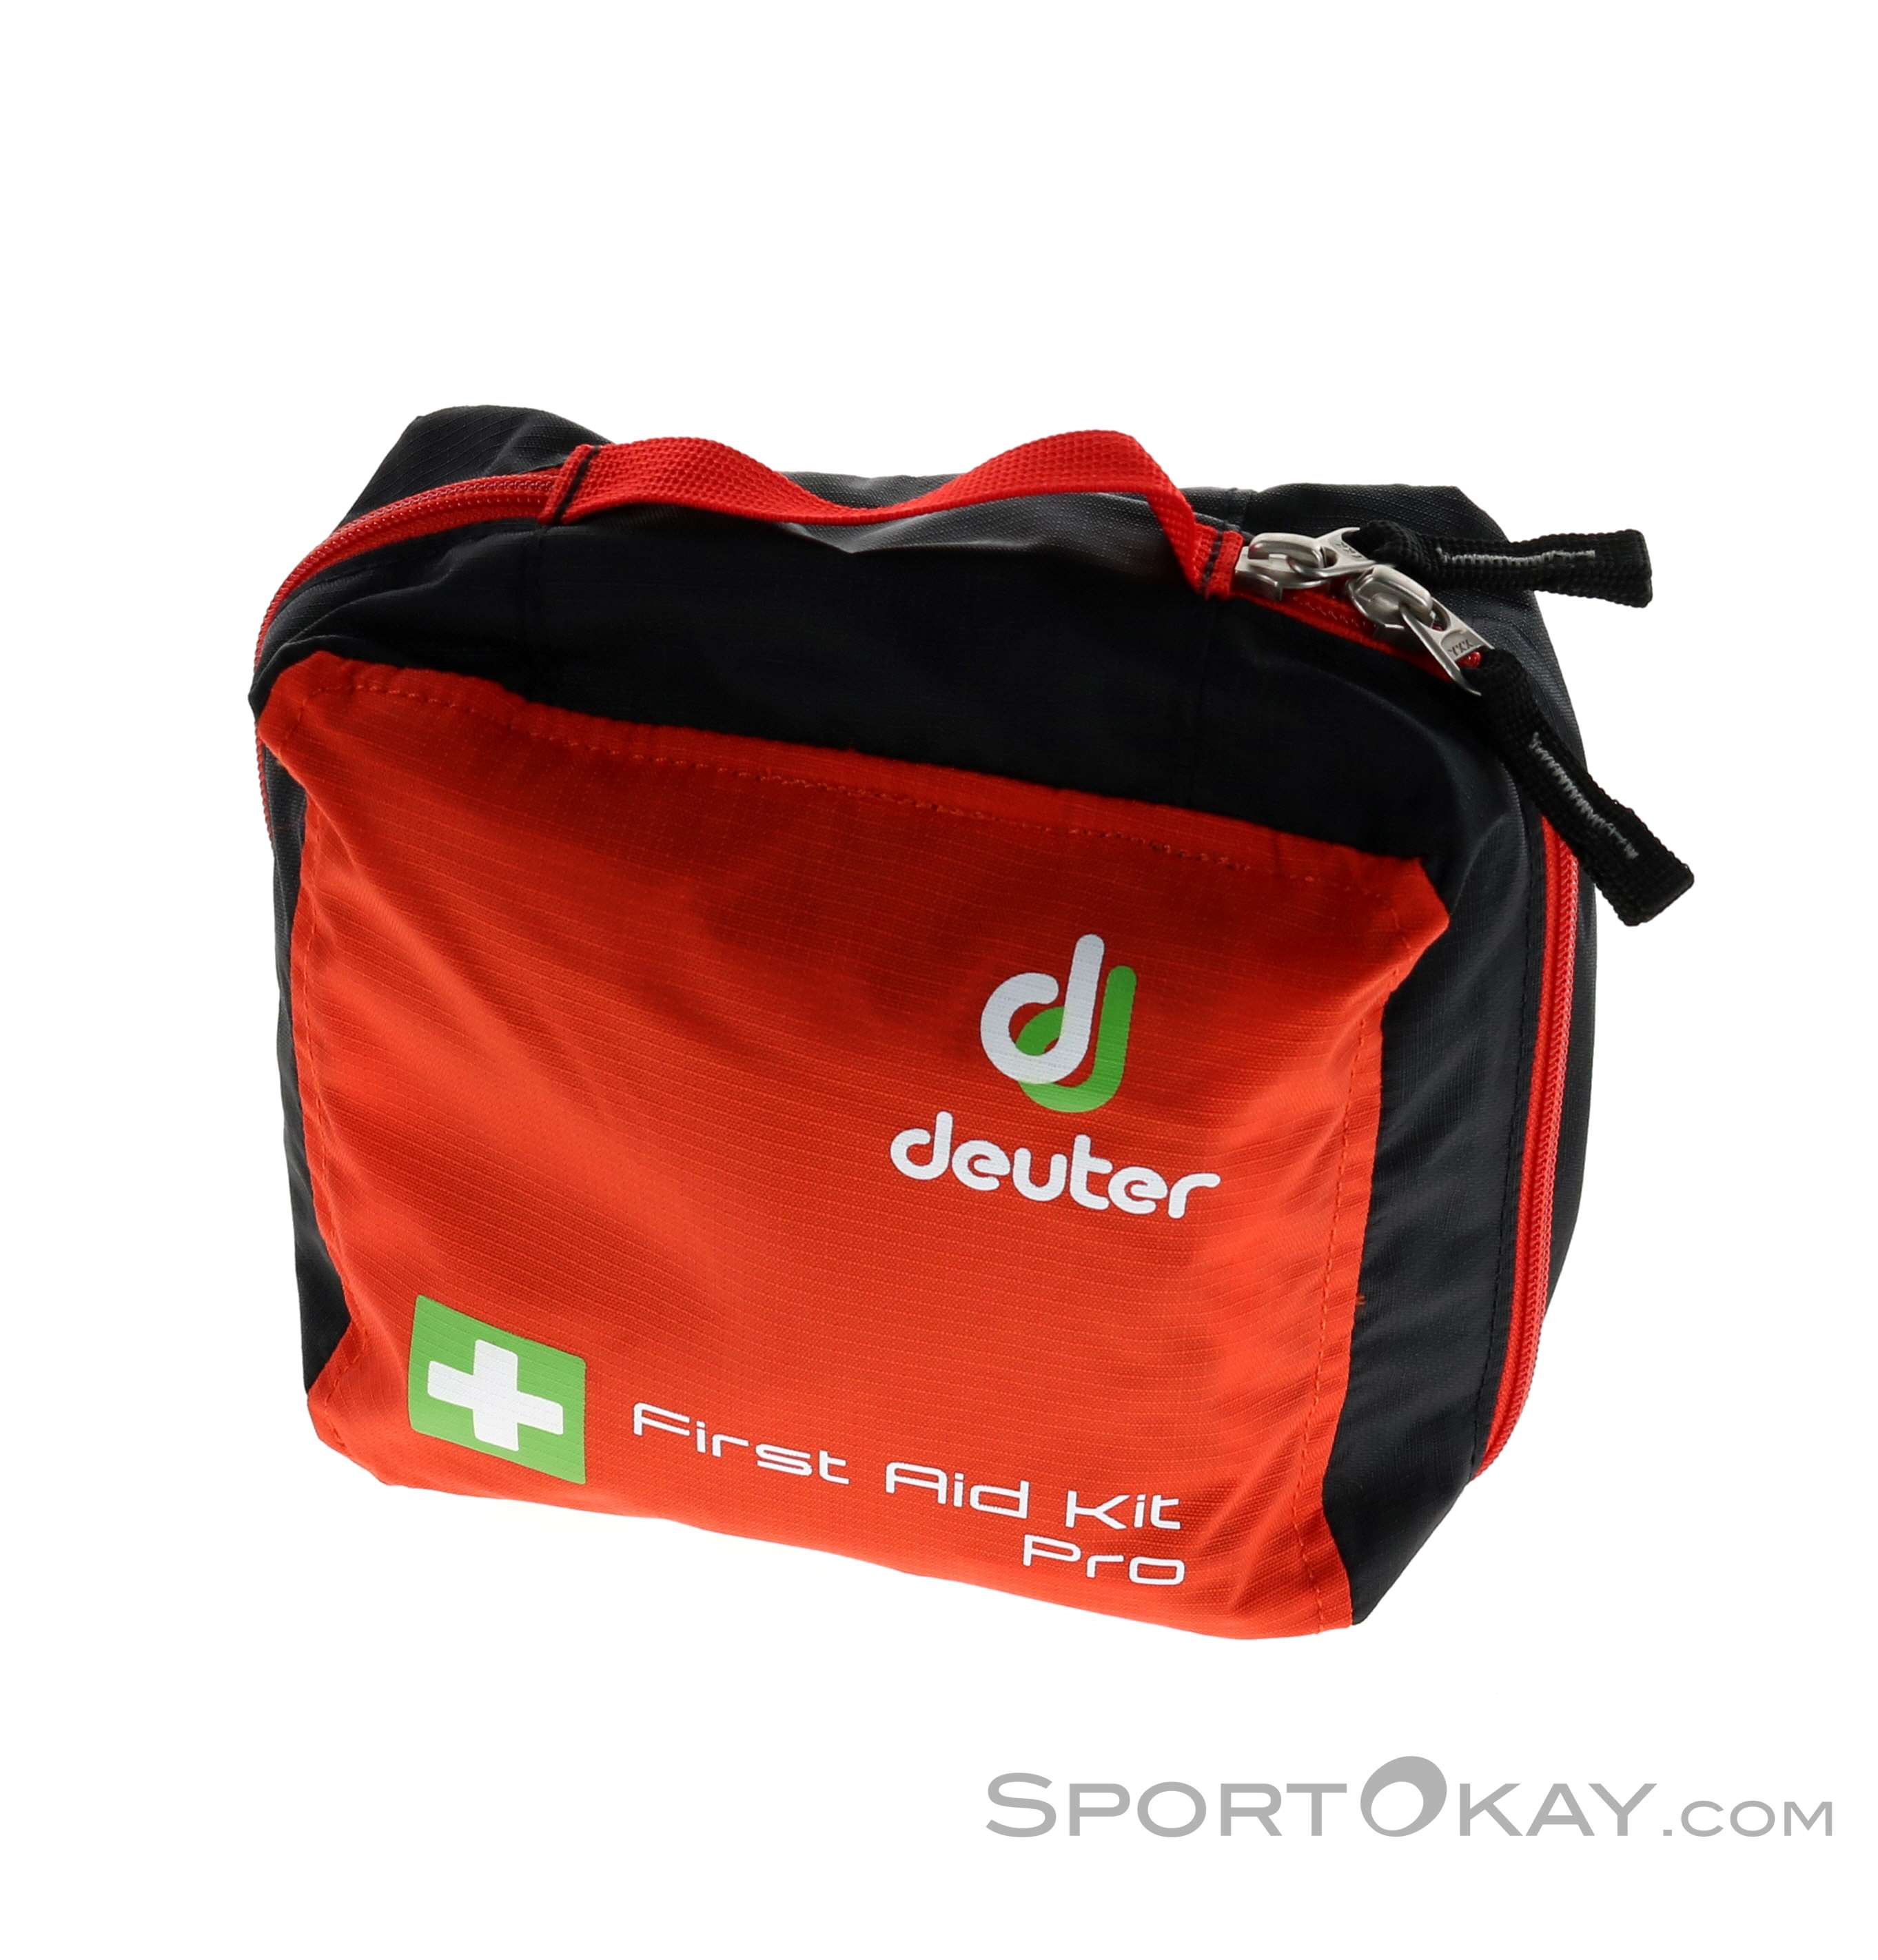 Deuter First Aid Kit Pro First Aid Kit - First Aid Kits - Camping